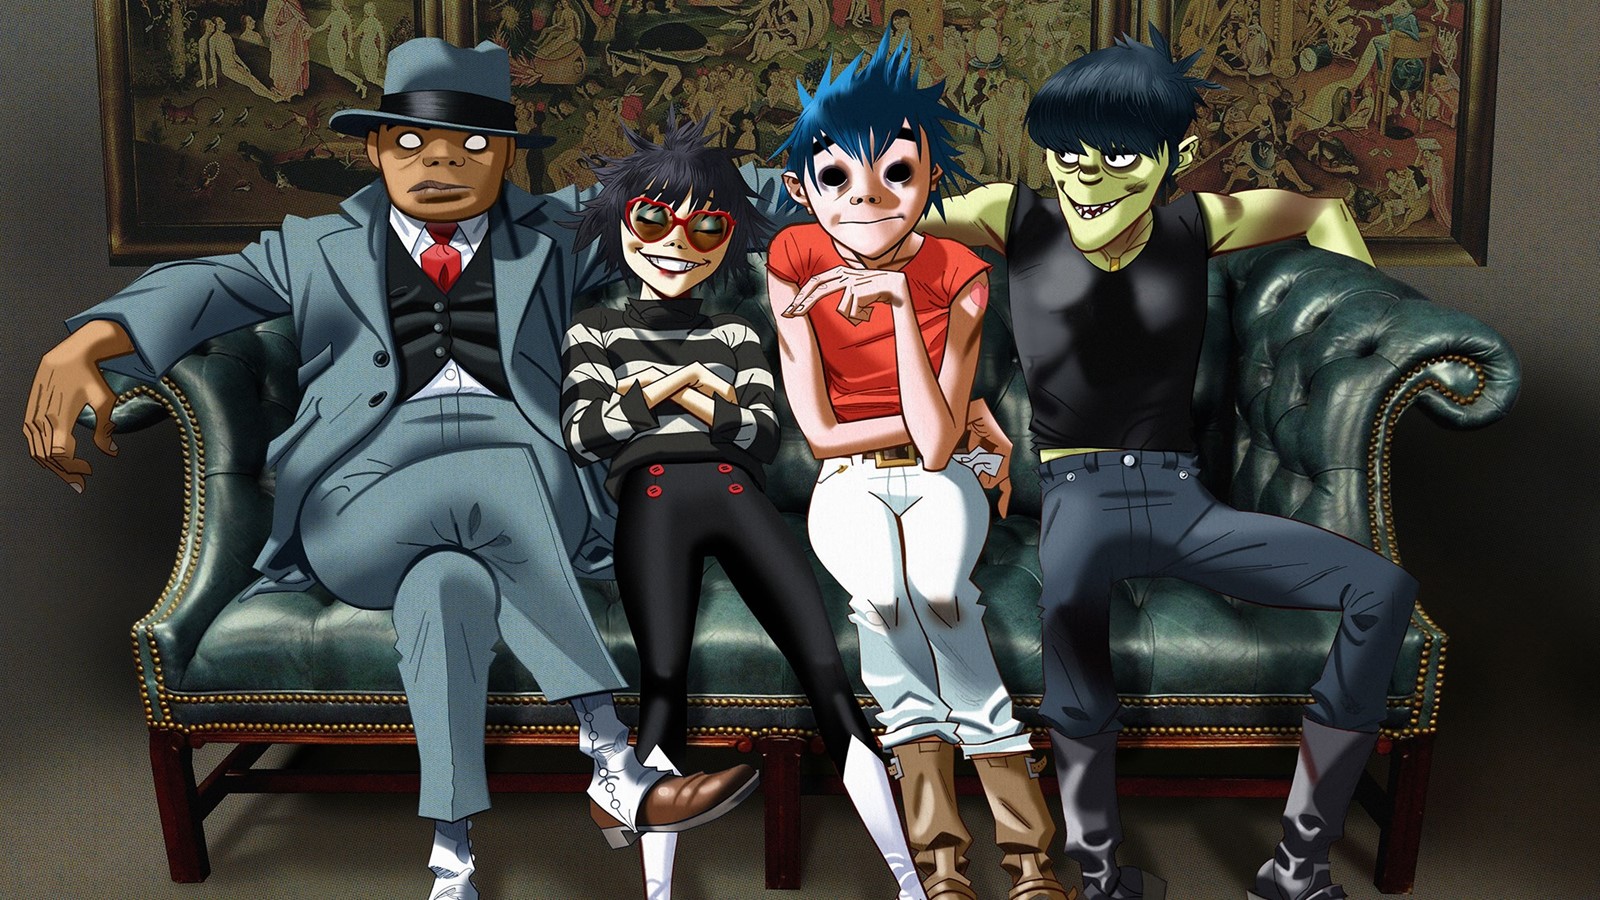 The members of the Gorillaz rock band in anime